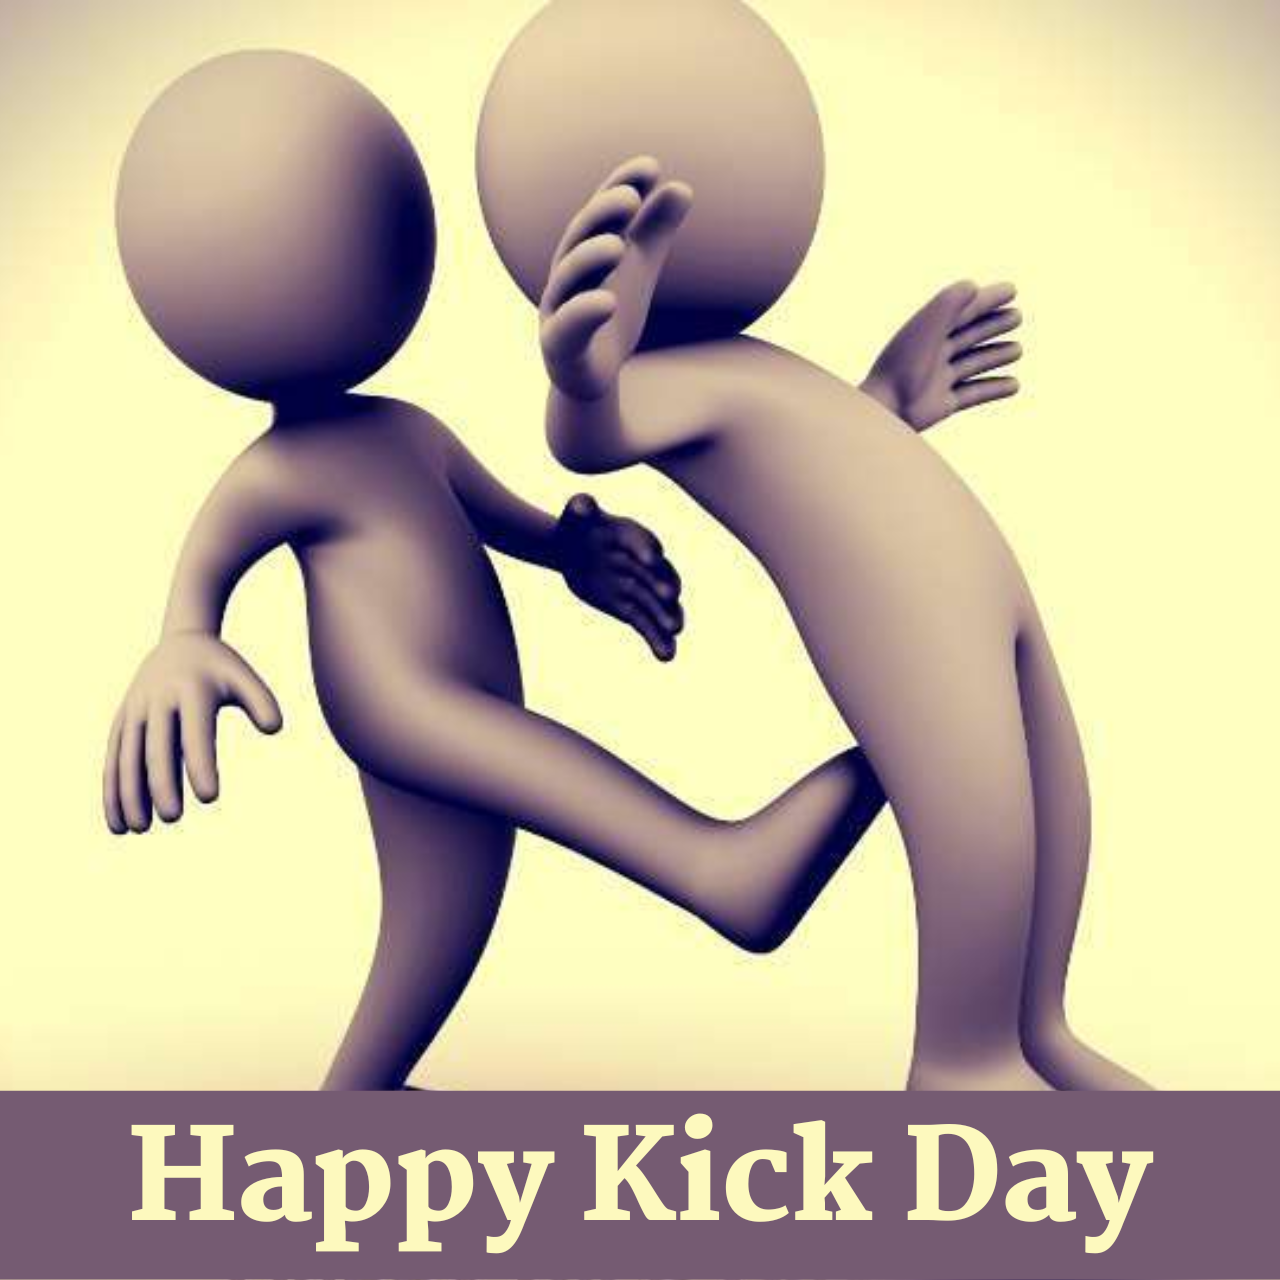 Happy Kick Day 2023 Images, Quotes, Wishes, Greetings, Messages, Sayings, Shayari and Status